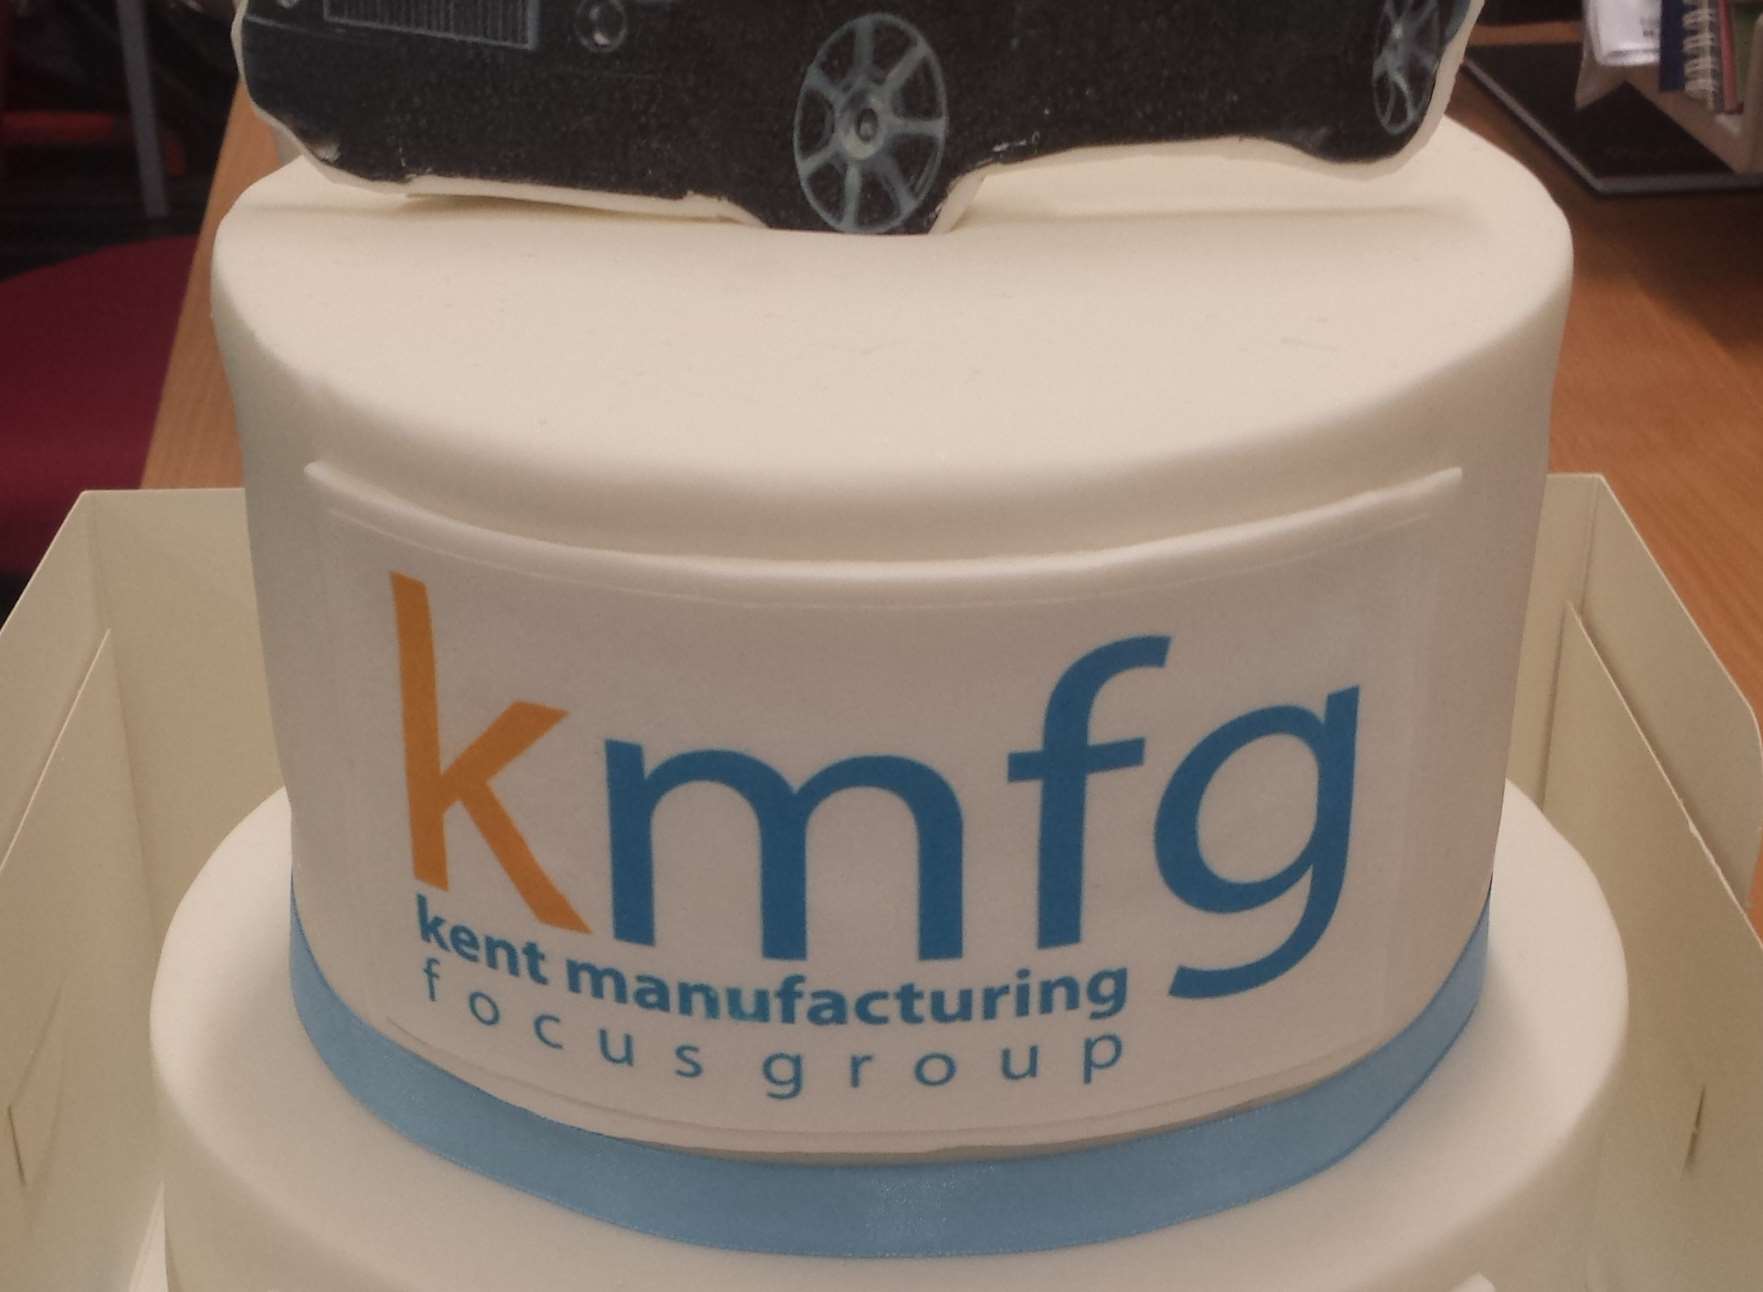 Kent Manufacturing Focus Group has been launched